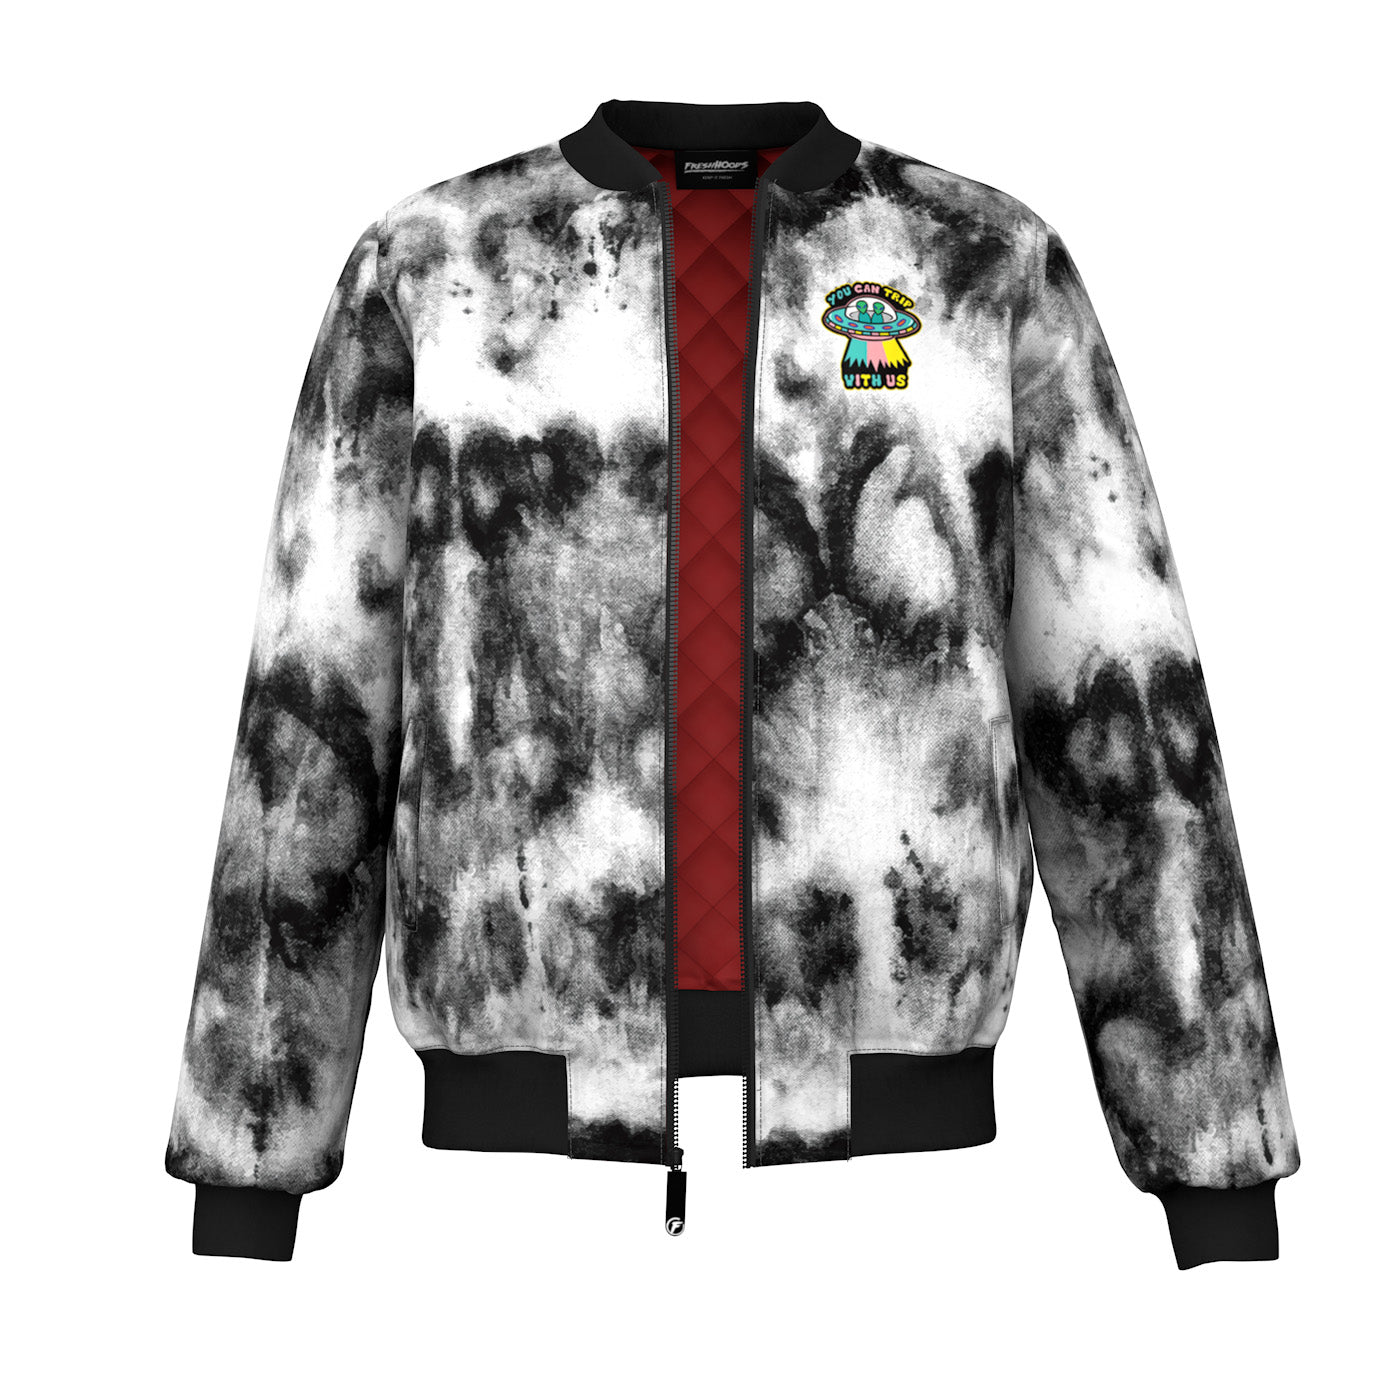 You Can Trip With Us Bomber Jacket